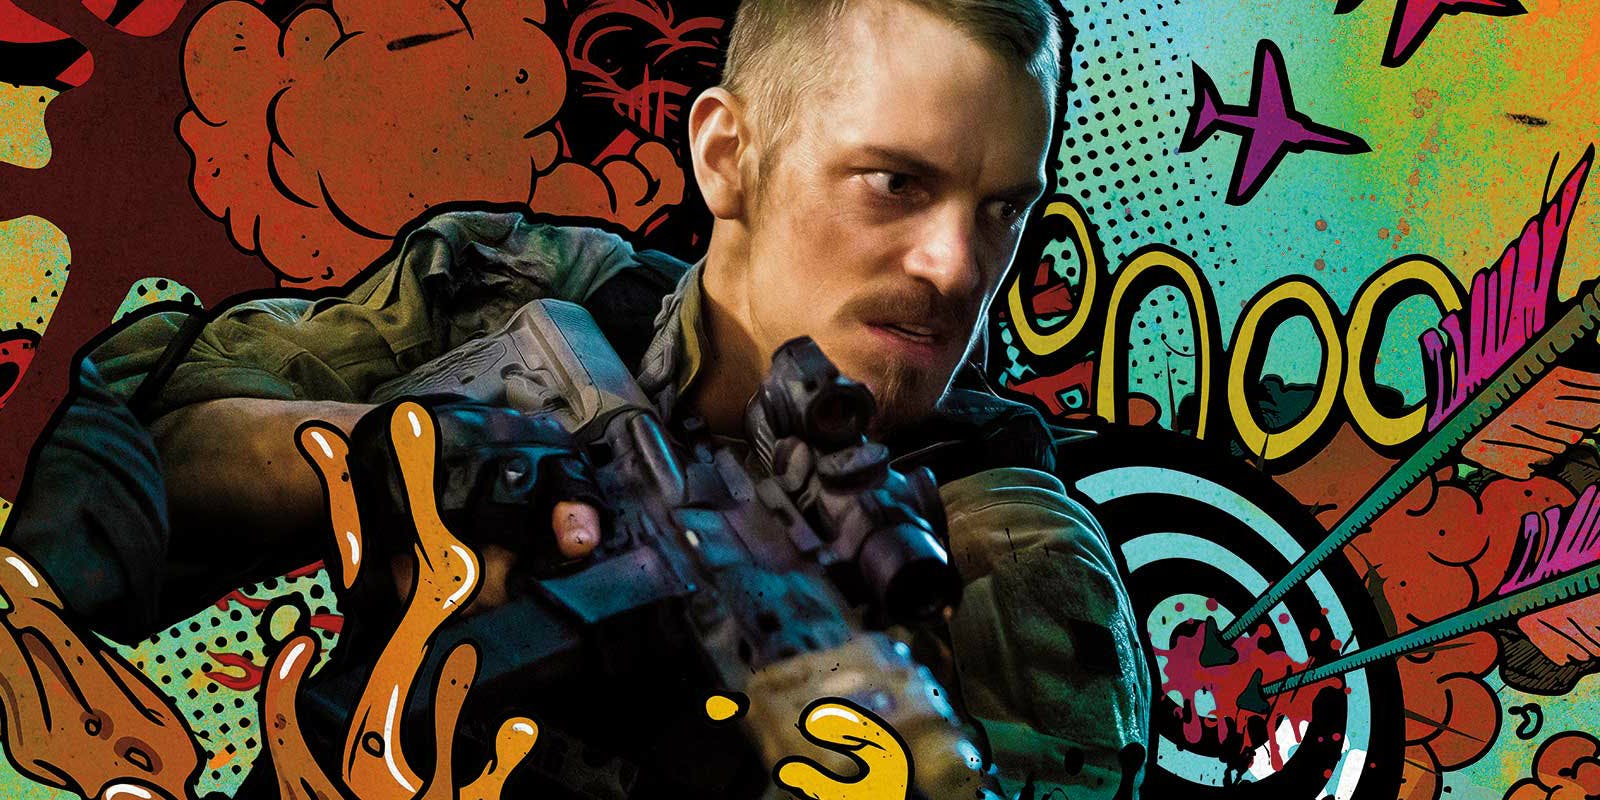 Joel Kinnaman To Reprise His Role As Rick Flag In Gunn’s Suicide Squad